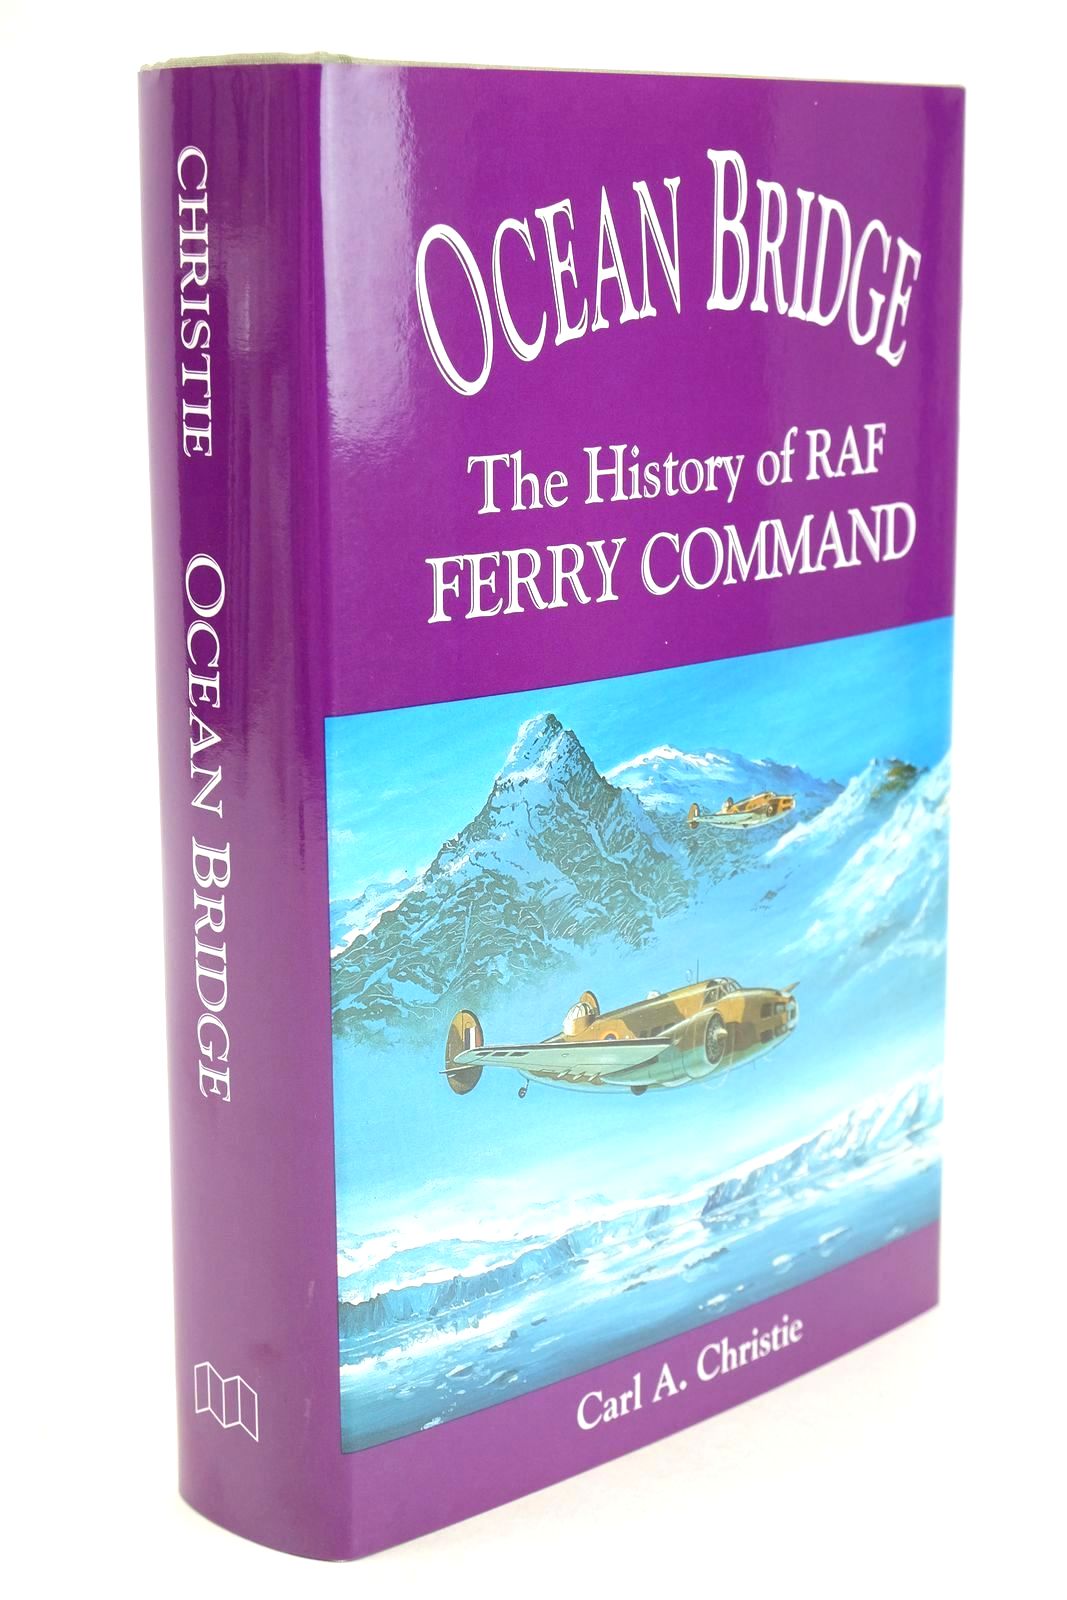 Photo of OCEAN BRIDGE: THE HISTORY OF THE RAF FERRY COMMAND written by Christie, Carl A. Hatch, Fred published by Midland Publishing Limited (STOCK CODE: 1325572)  for sale by Stella & Rose's Books